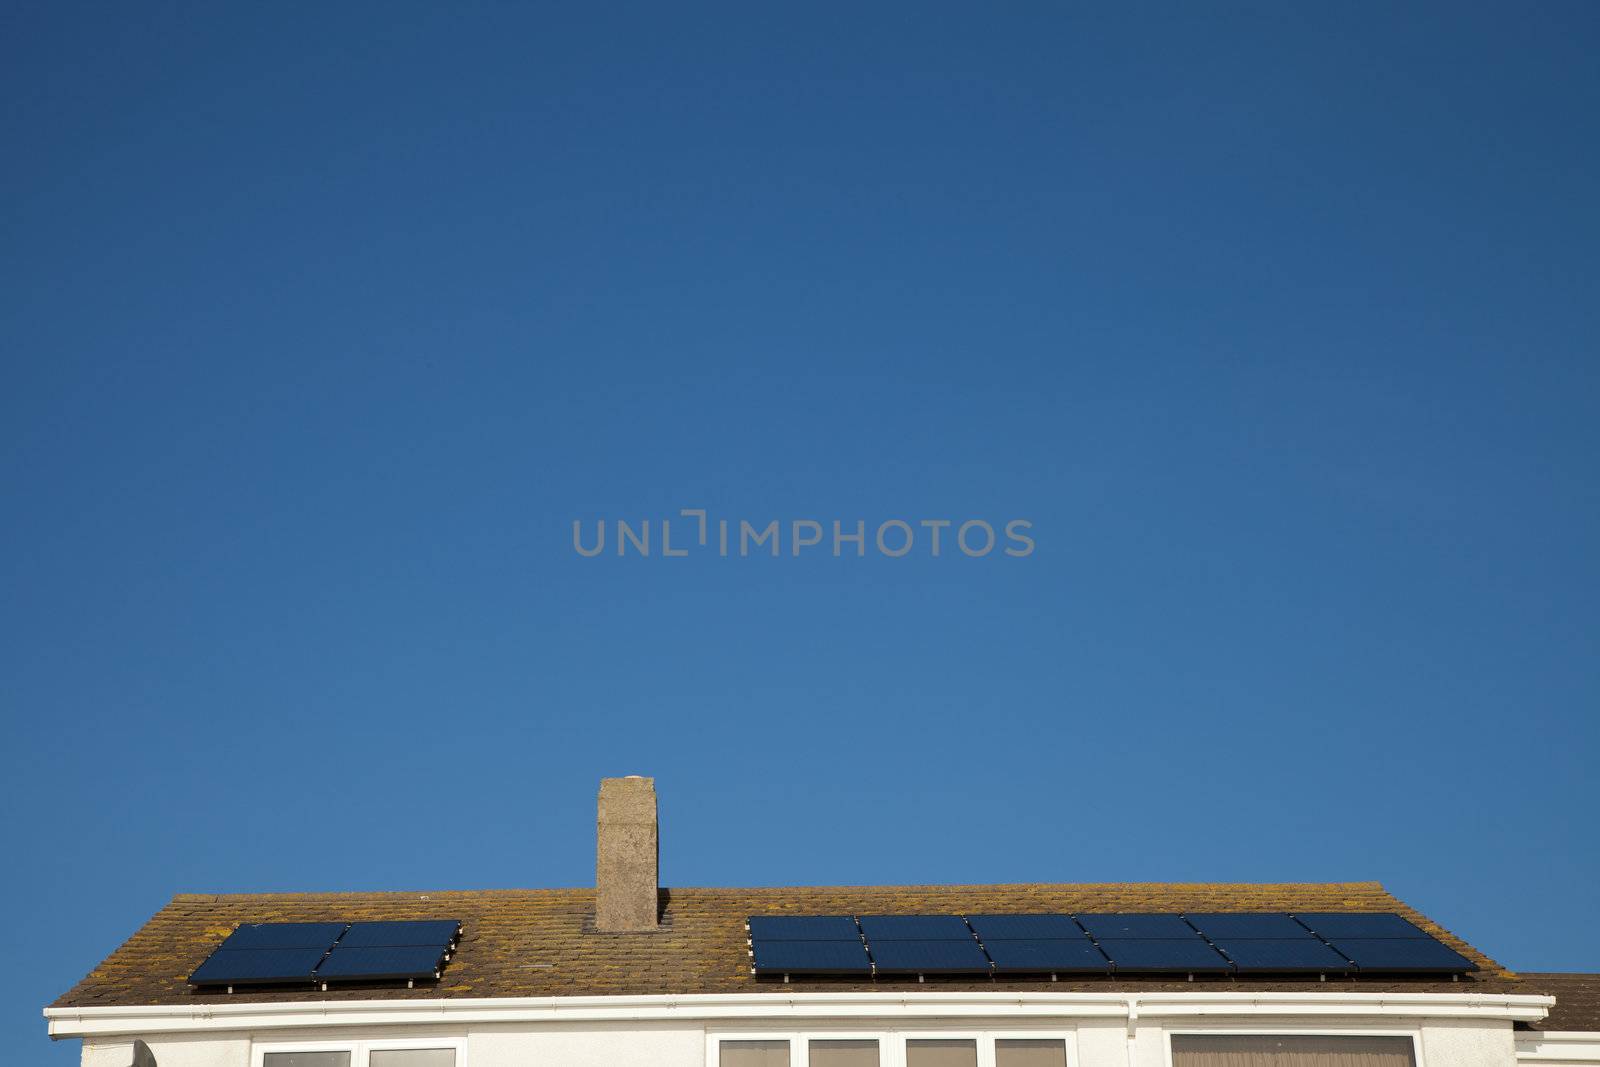 A house roof with an array of solar panel units against a clear blue sky.